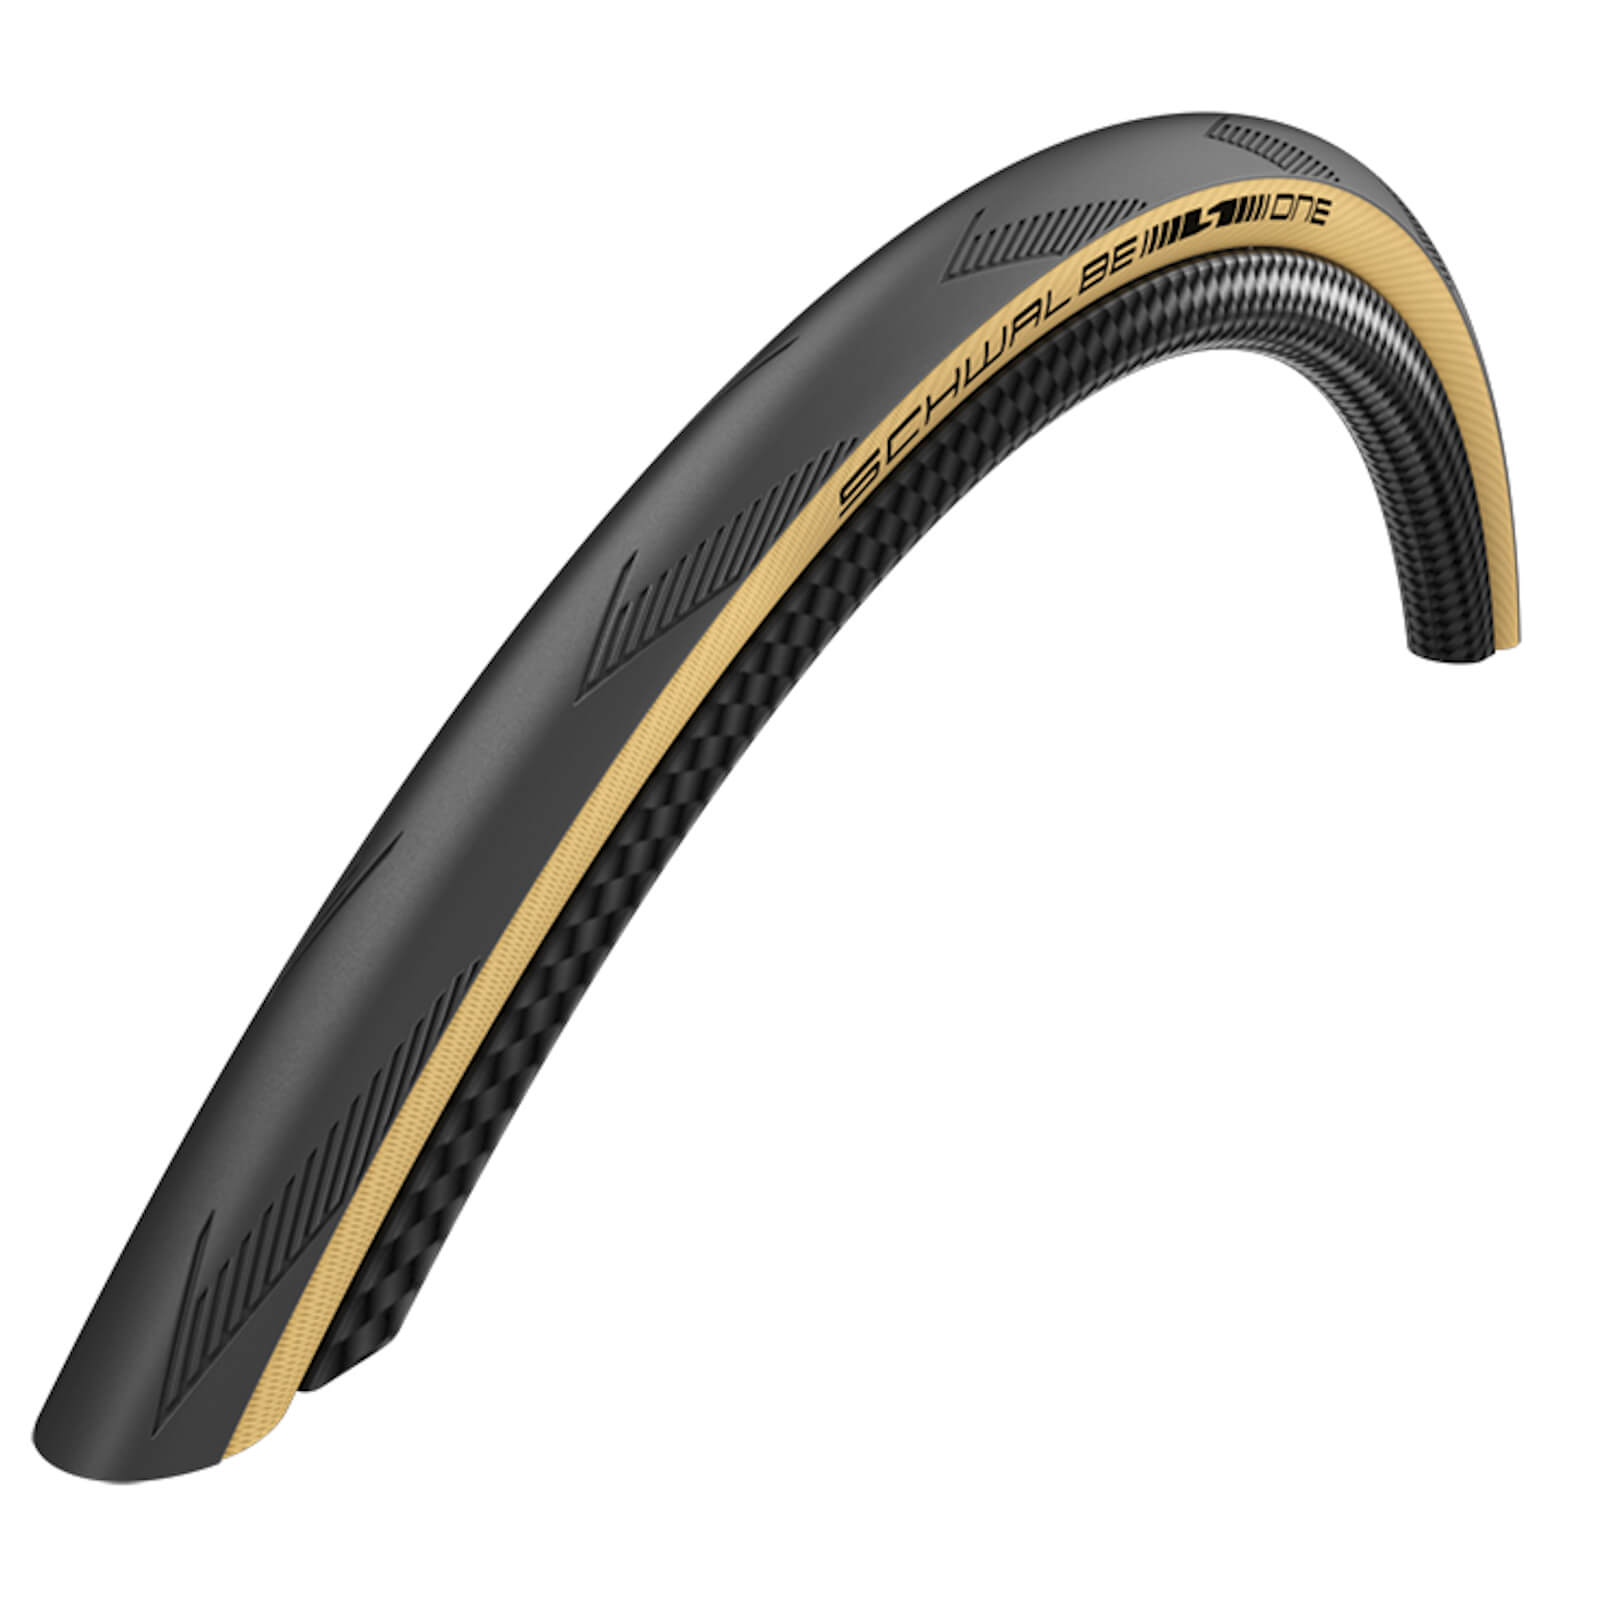 Schwalbe One Performance Road Tyre – 700 x 25C – Classic Tan